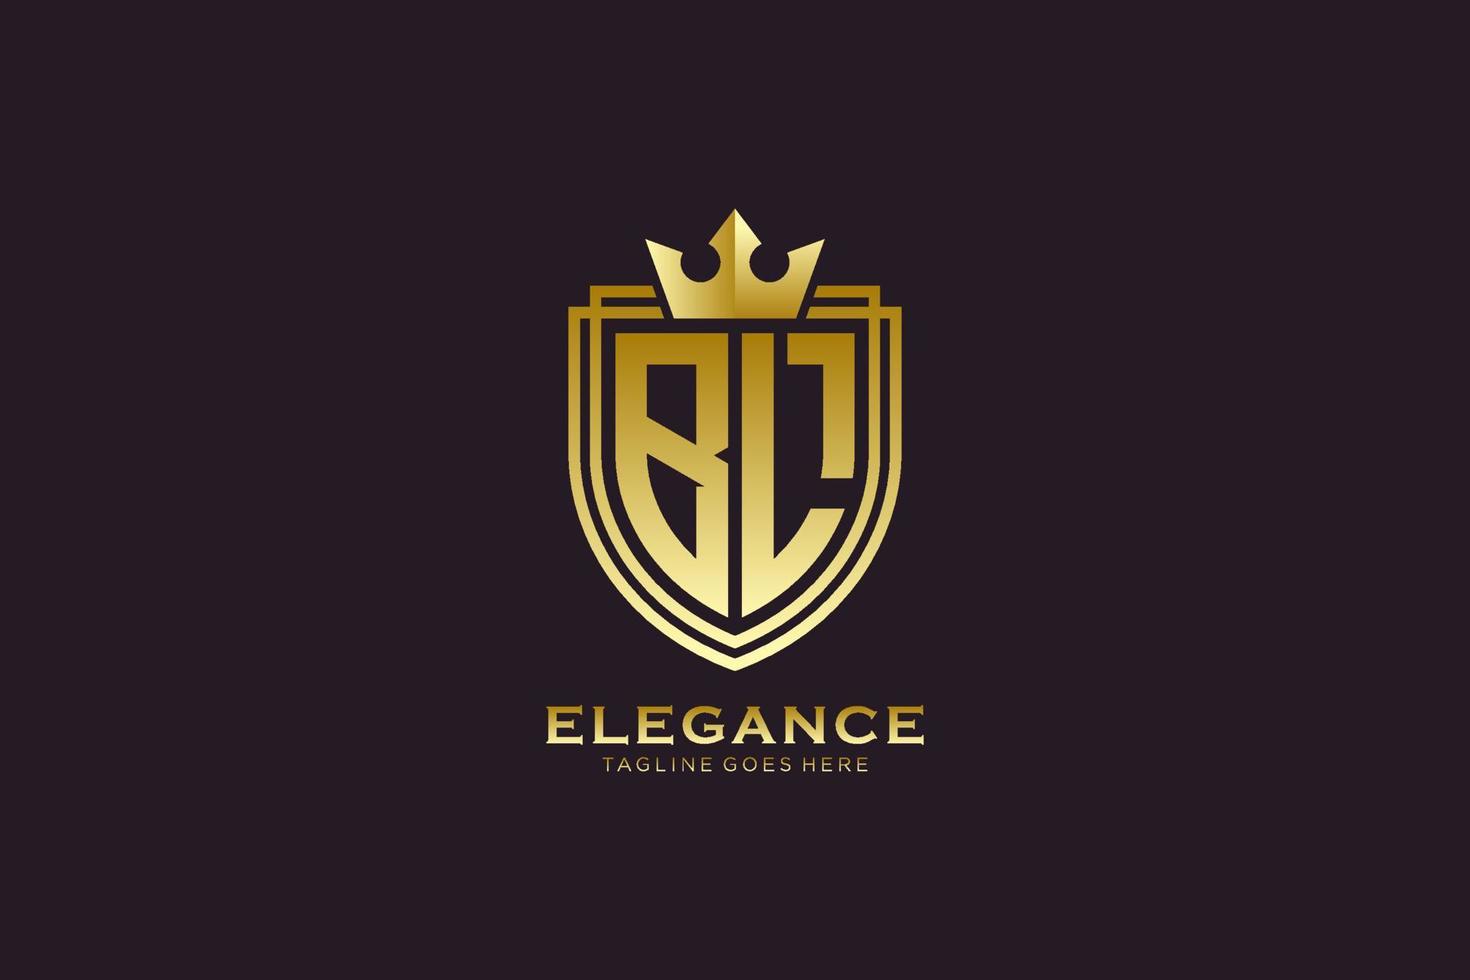 initial BL elegant luxury monogram logo or badge template with scrolls and royal crown - perfect for luxurious branding projects vector